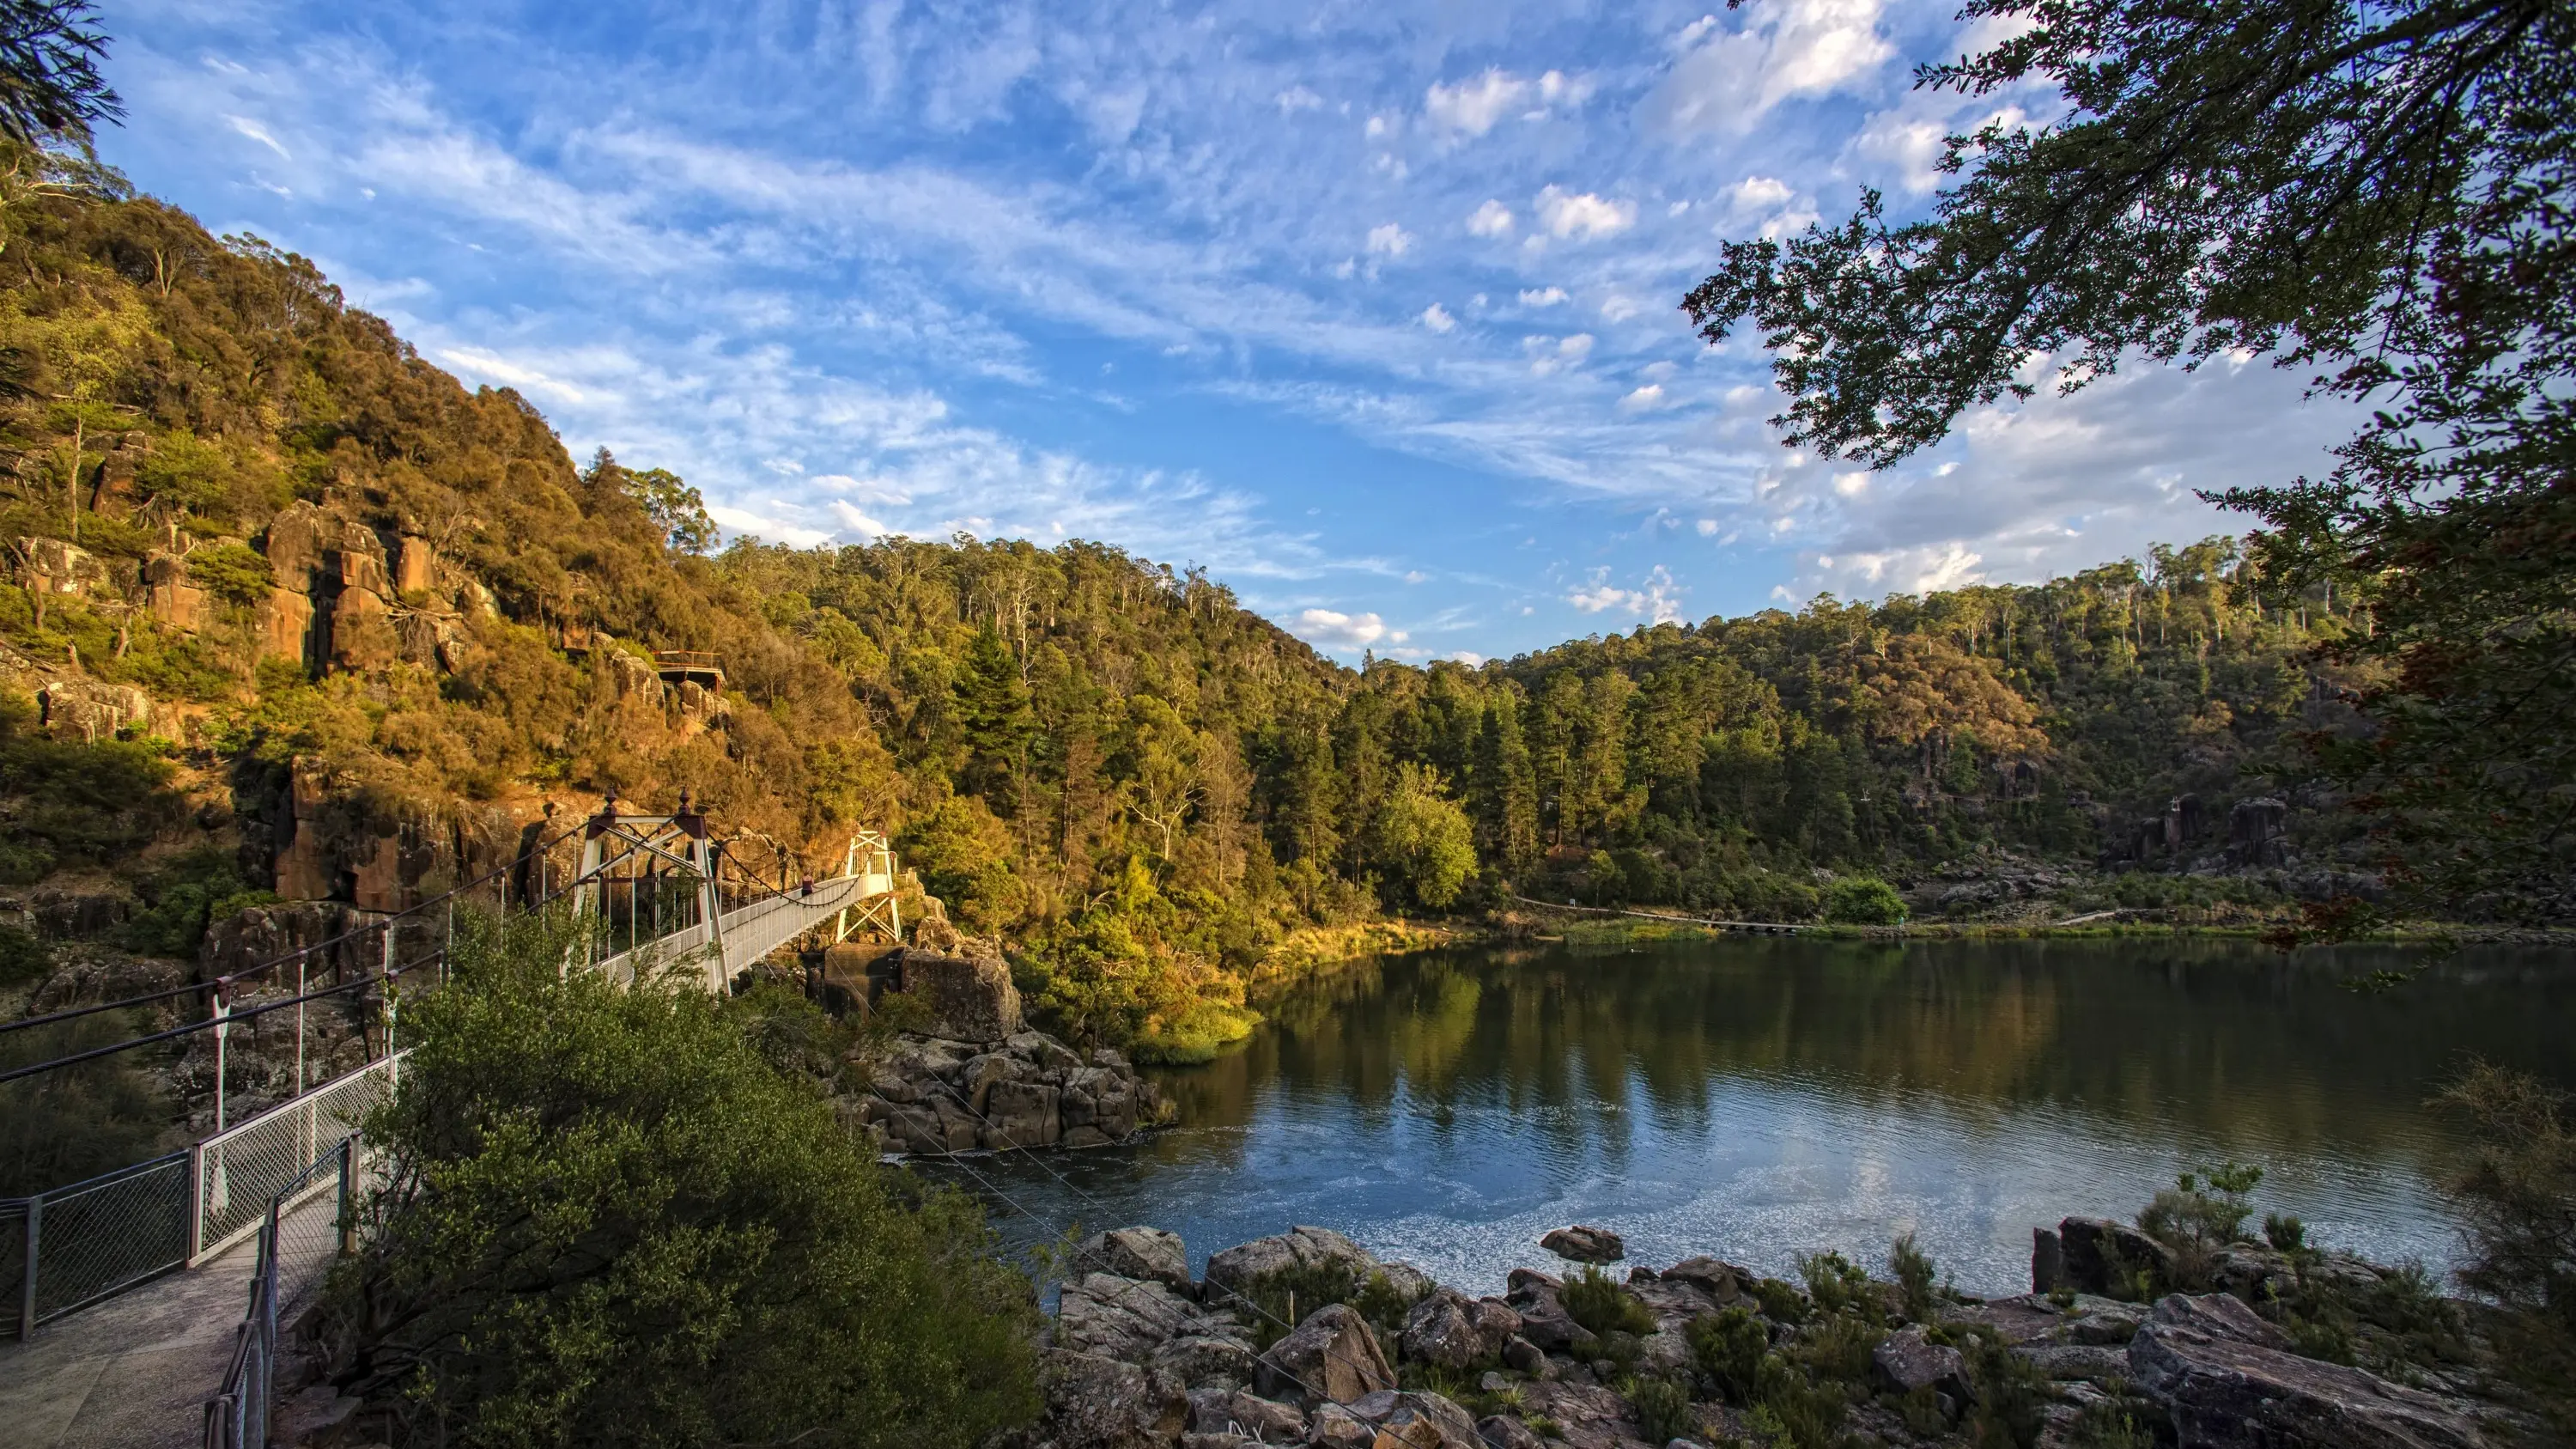 Cataract Gorge, with a lake surrounded by trees and a boardwalk on the left. Image credit: Tourism Tasmania/Rob Burnett